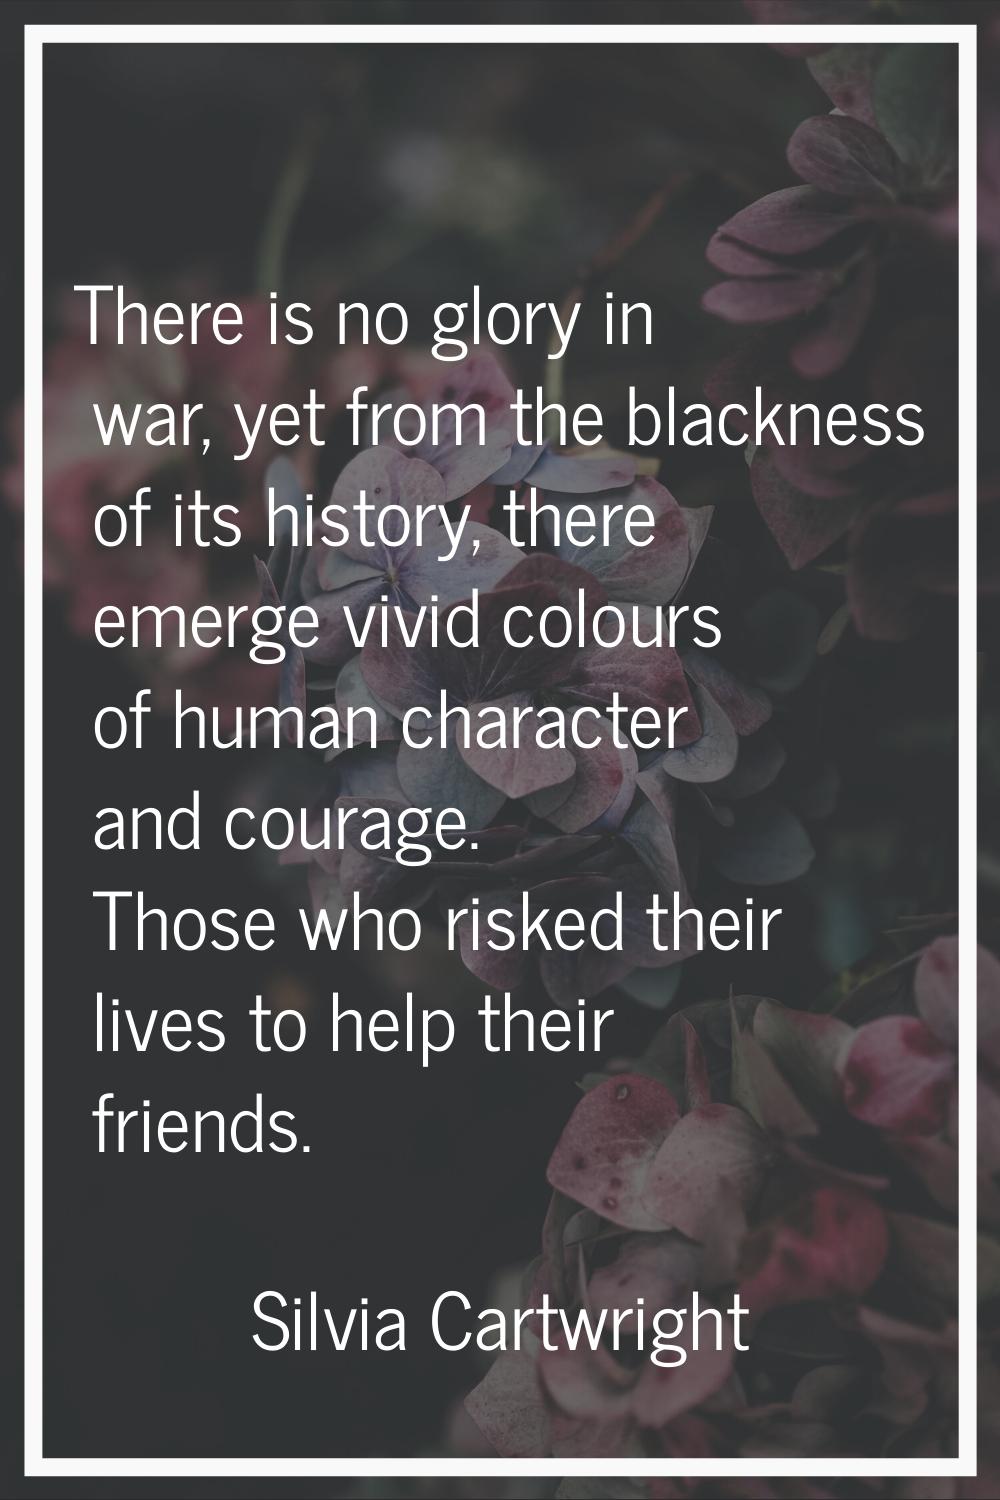 There is no glory in war, yet from the blackness of its history, there emerge vivid colours of huma